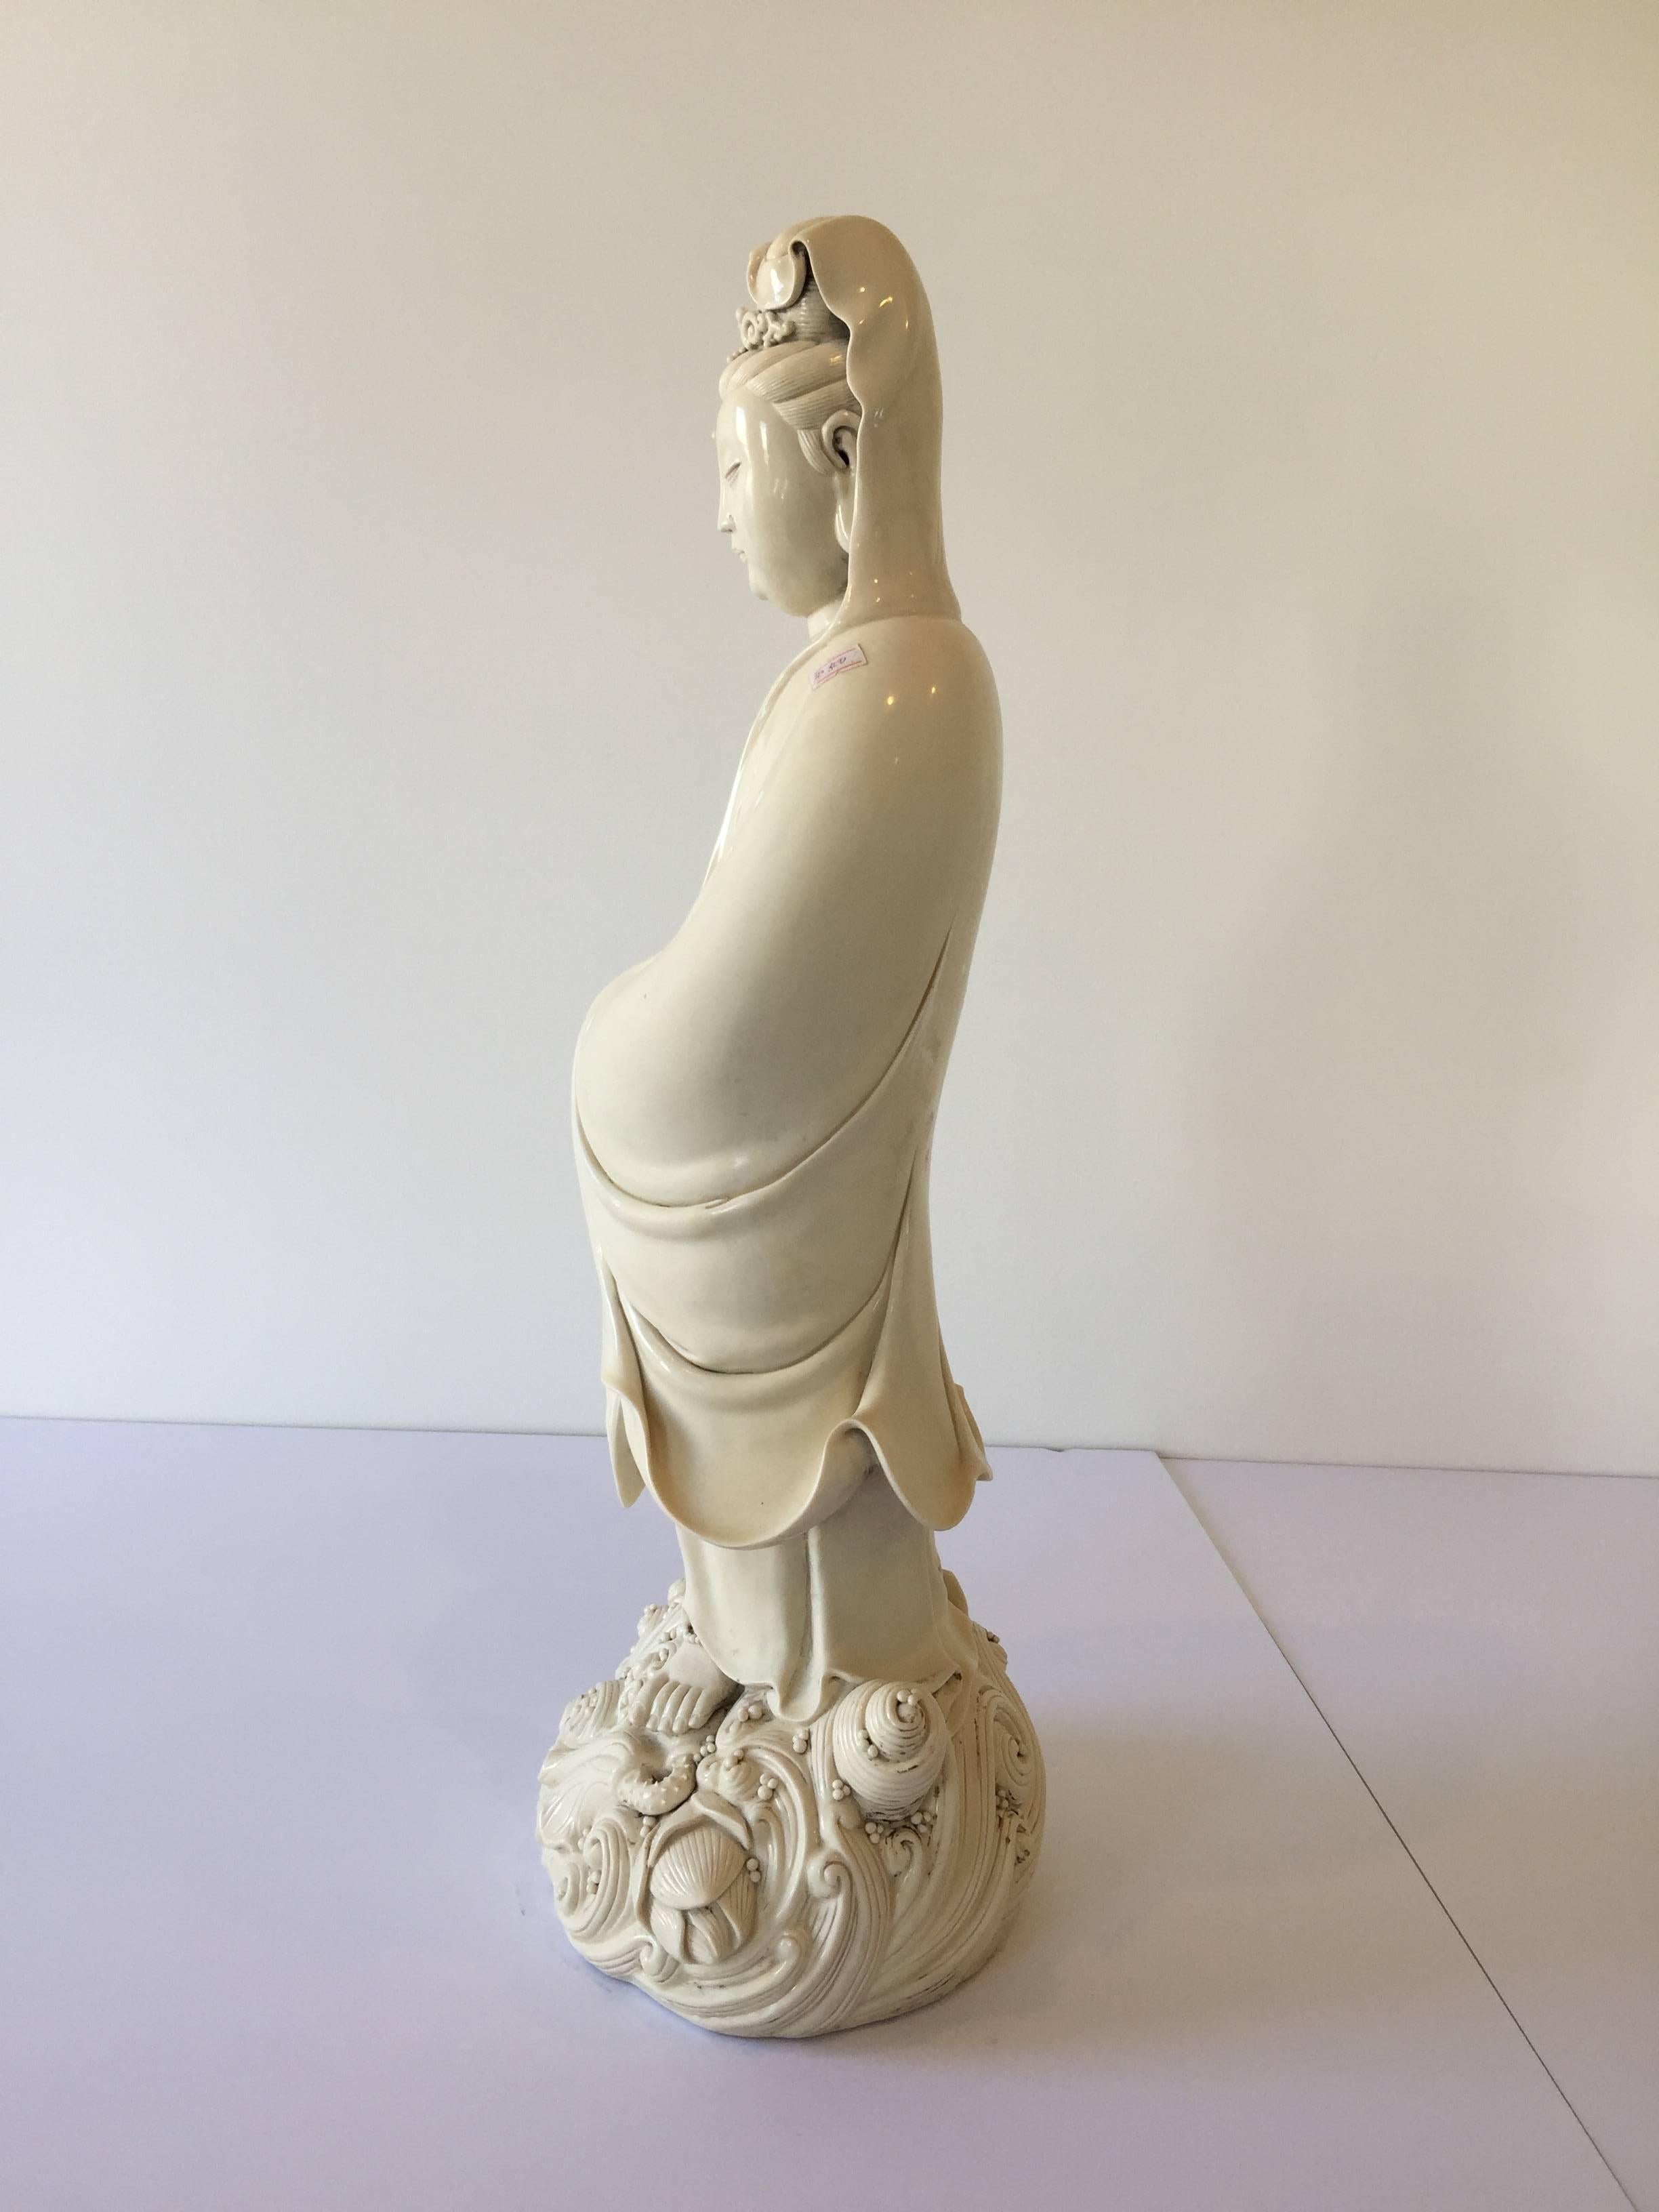 An early 20th century porcelain goddess of mercy on a pedestal of water, shell and lotus features.